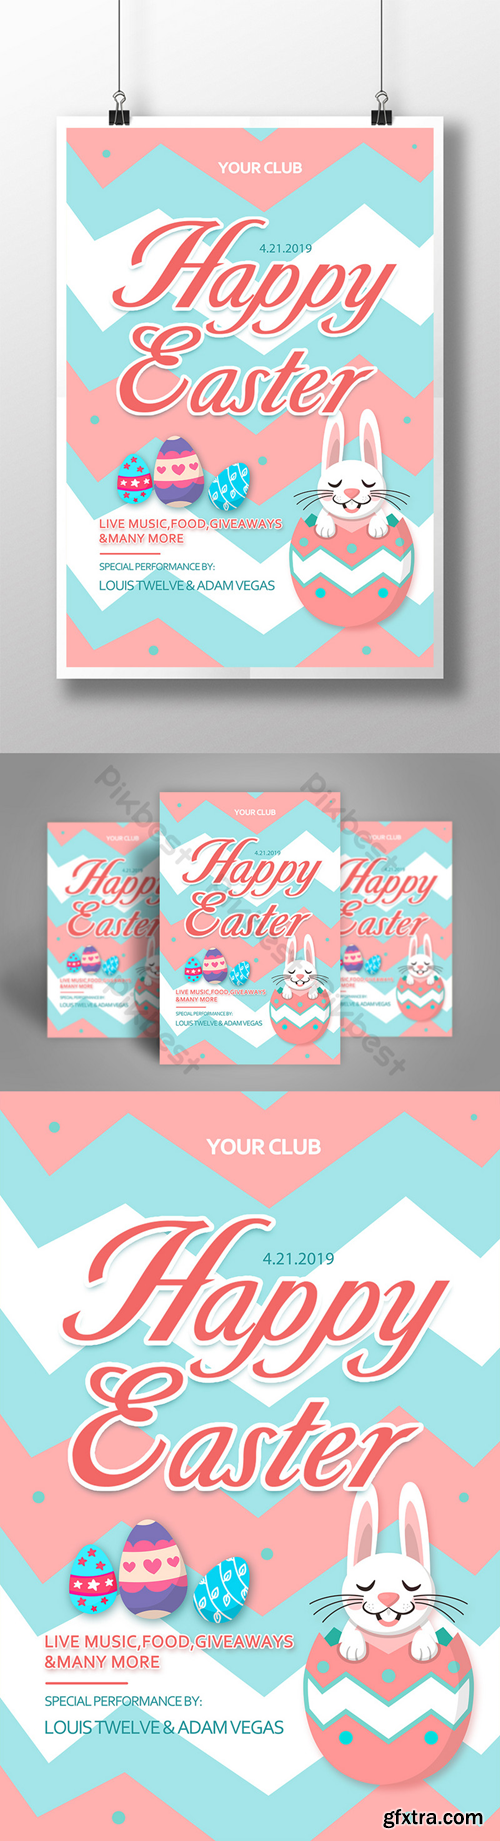 Happy Easter Creative Poster Template PSD